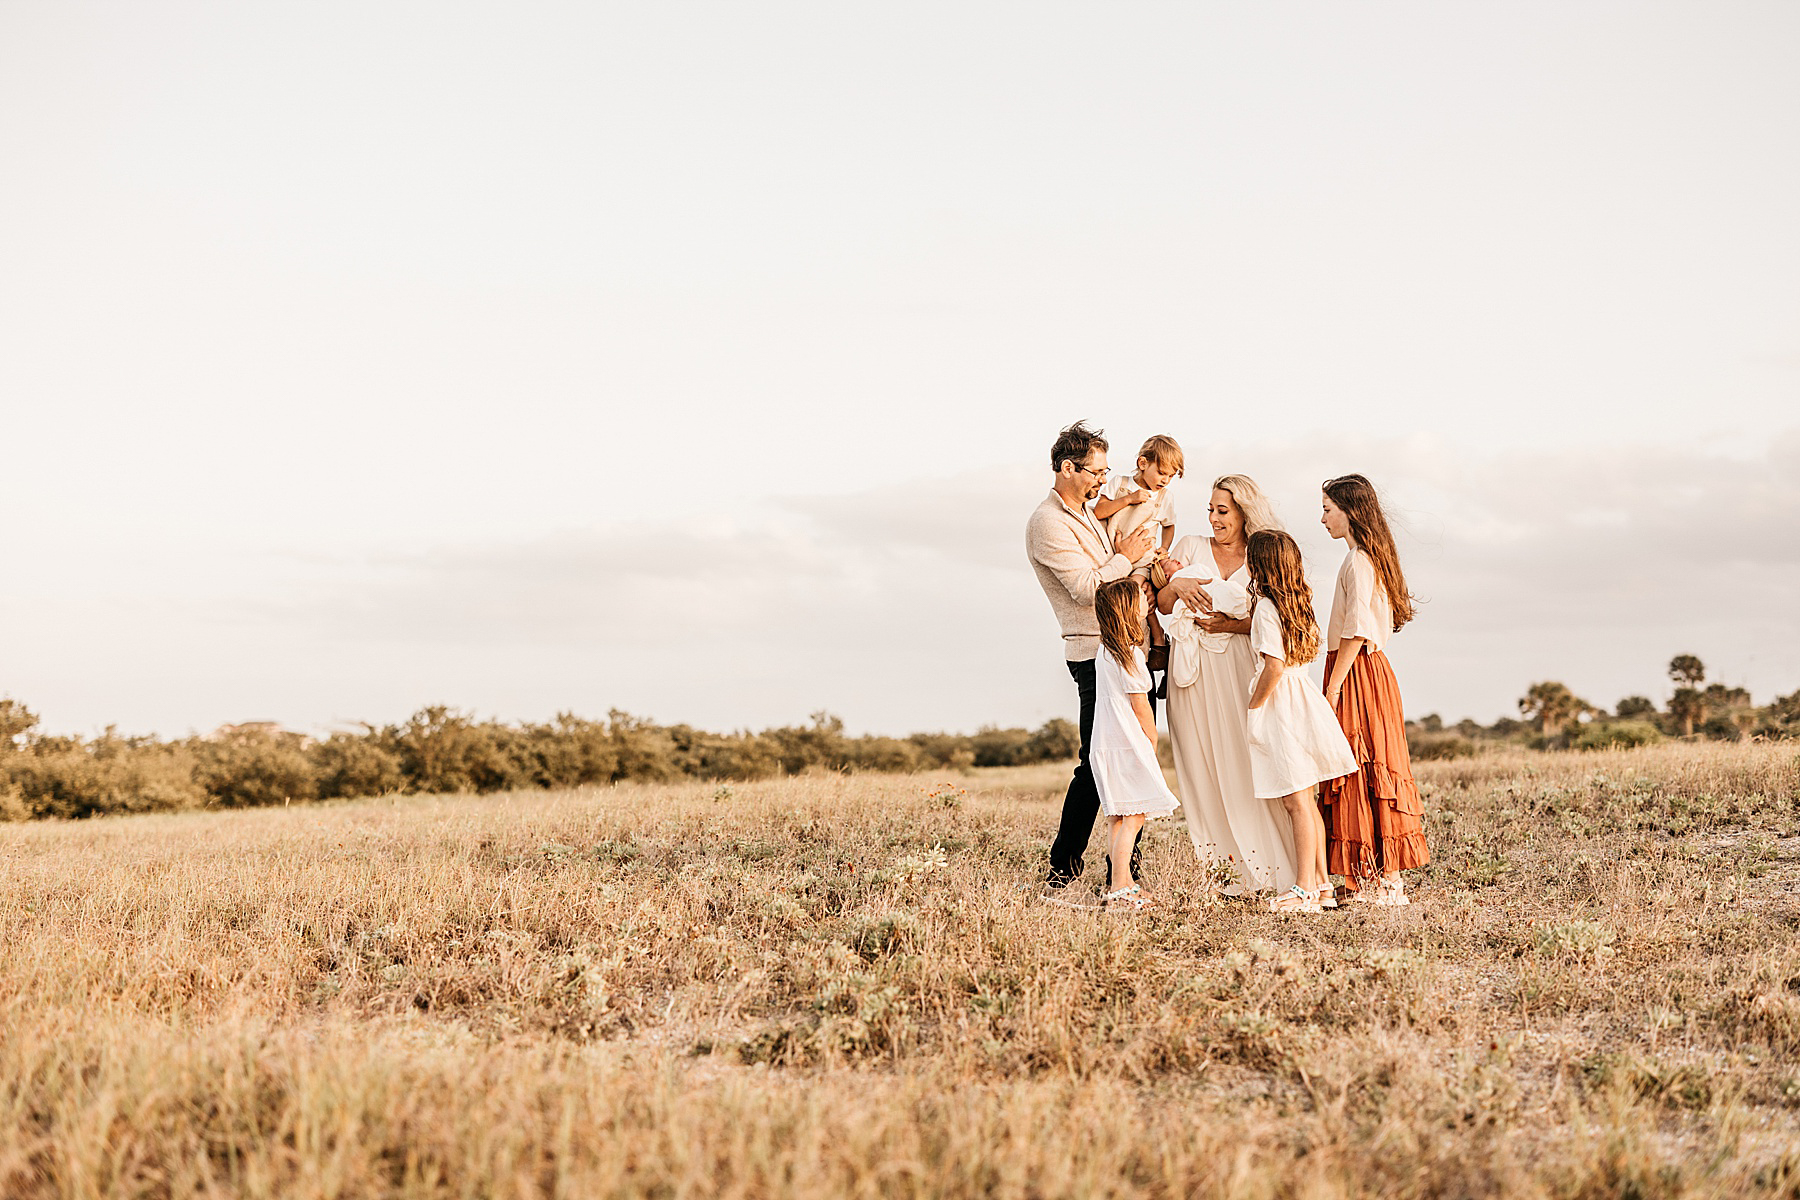 family wearing neutral colors standing in a grassy open field holding newborn baby boy